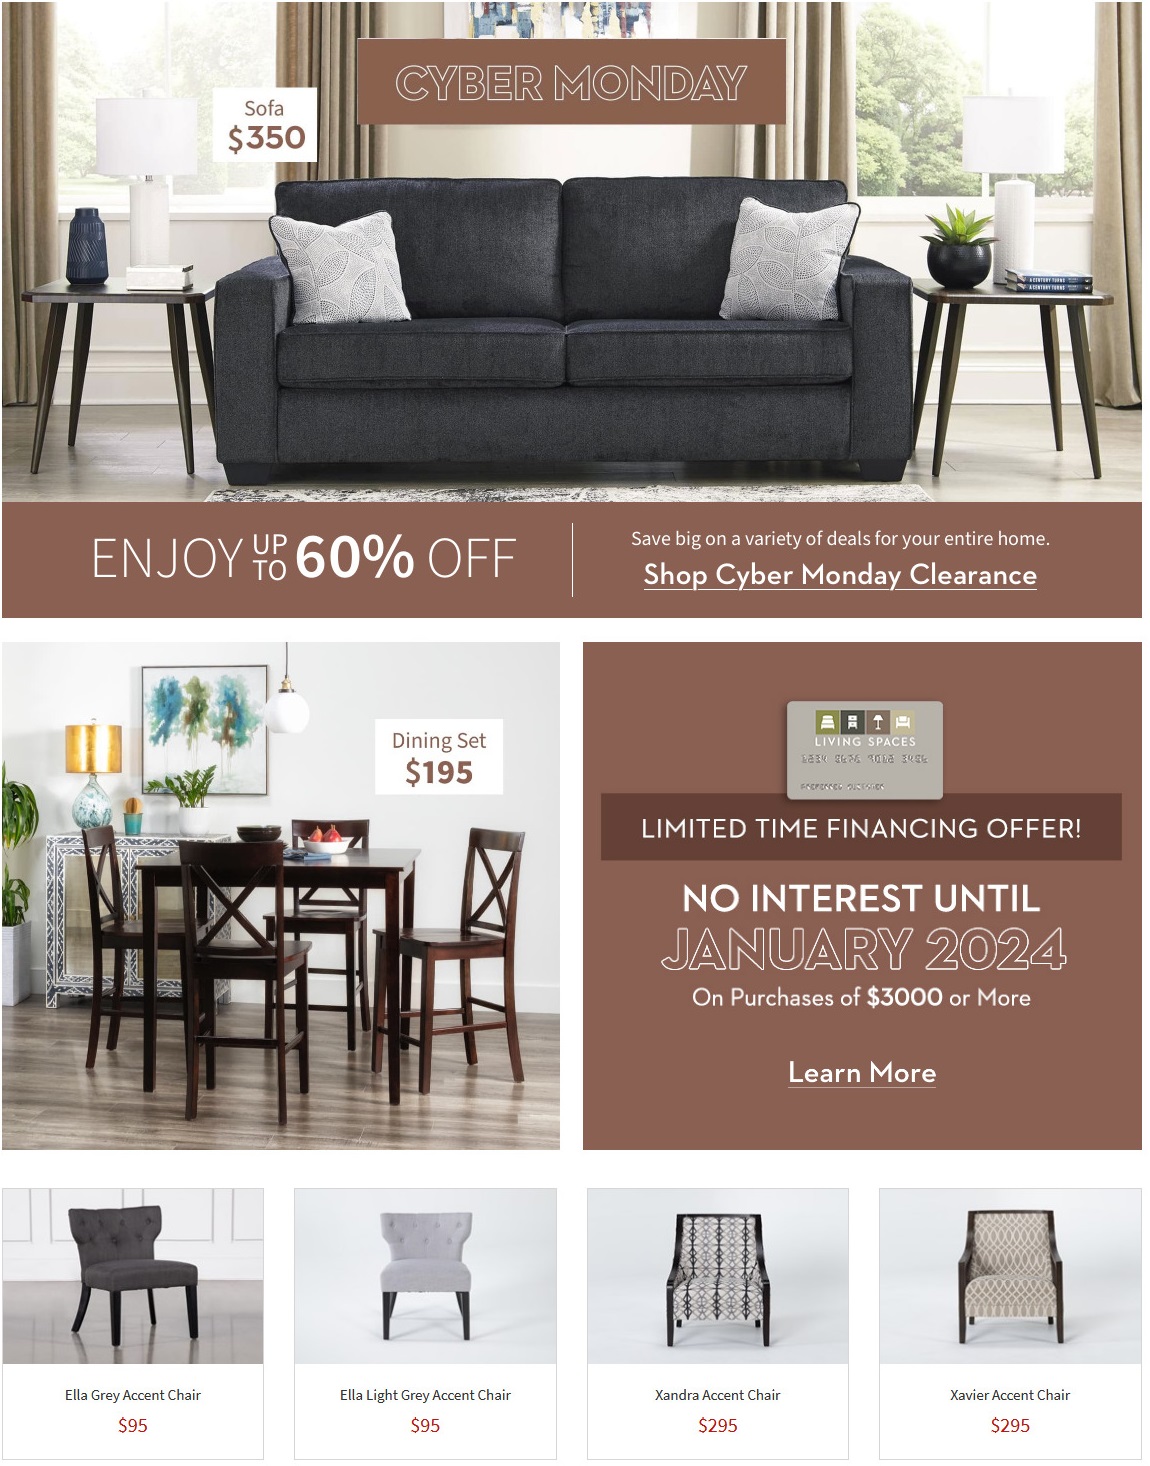 Living Spaces 2020 Cyber Monday Ad Page 1